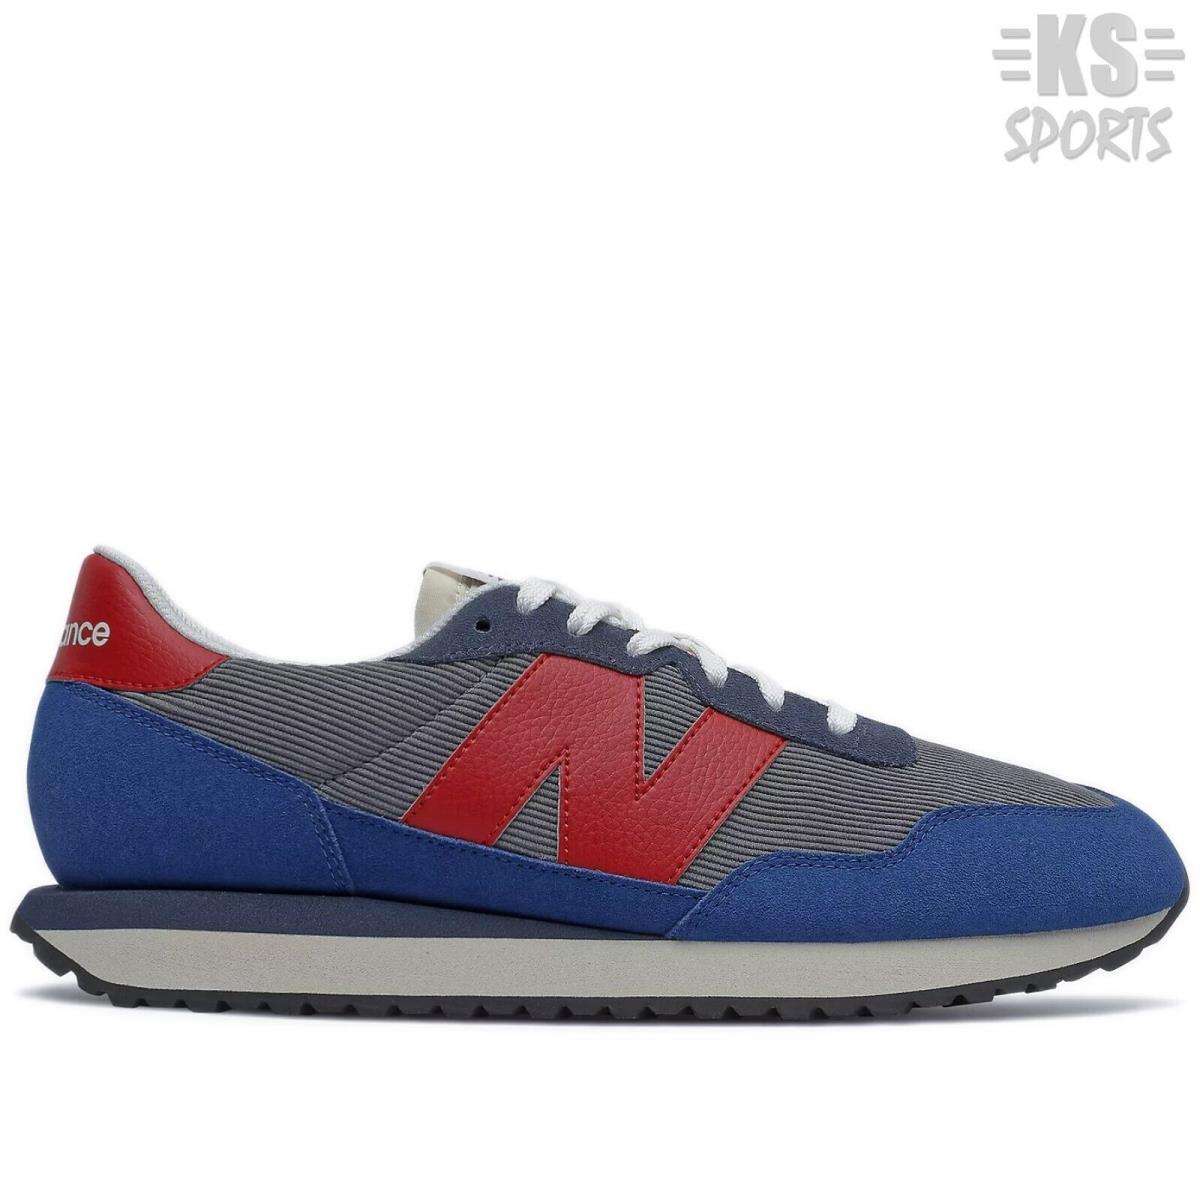 New Balance 237 `navy Team Red` Men`s Lifestyle Athletic Shoes MS237LE1 - Navy/Team Red